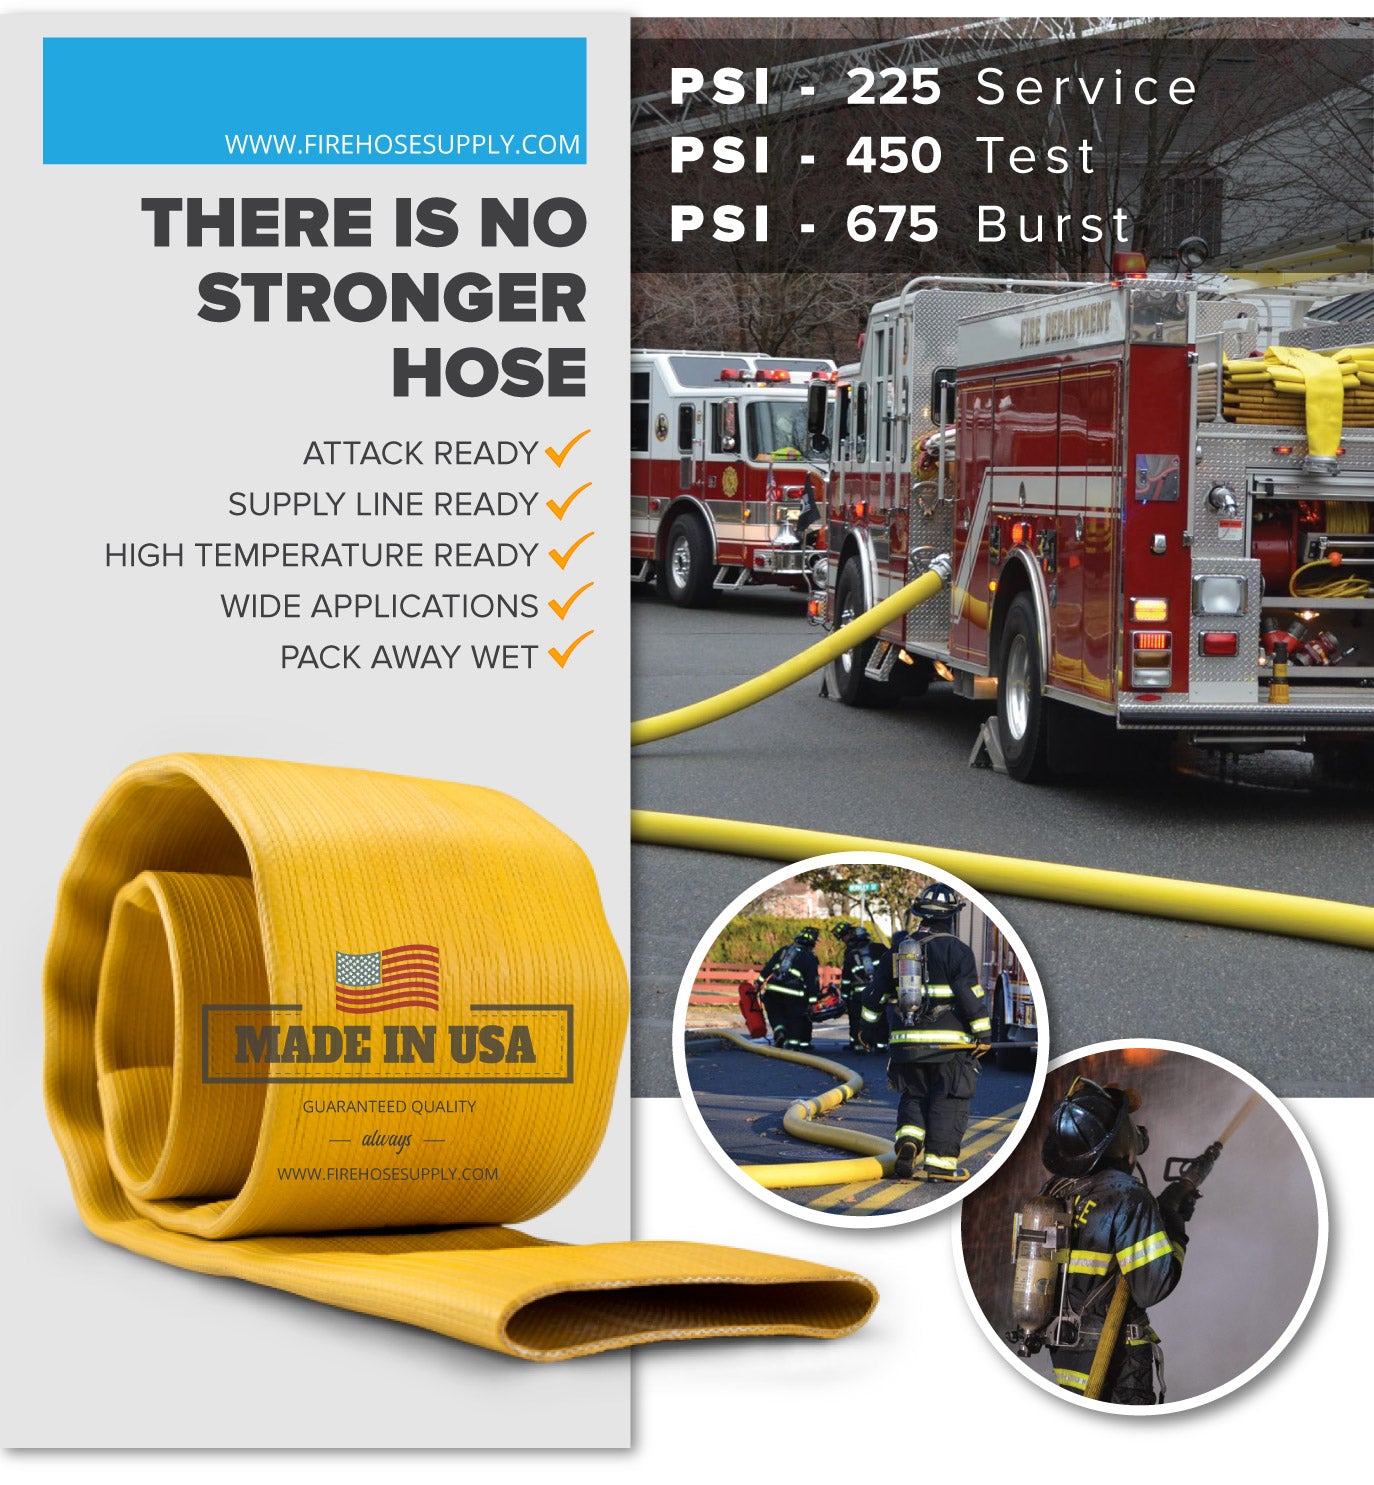 6 Inch Rubber Fire Hose Material Only Supply Ready Firefighter Yellow 450 PSI Test